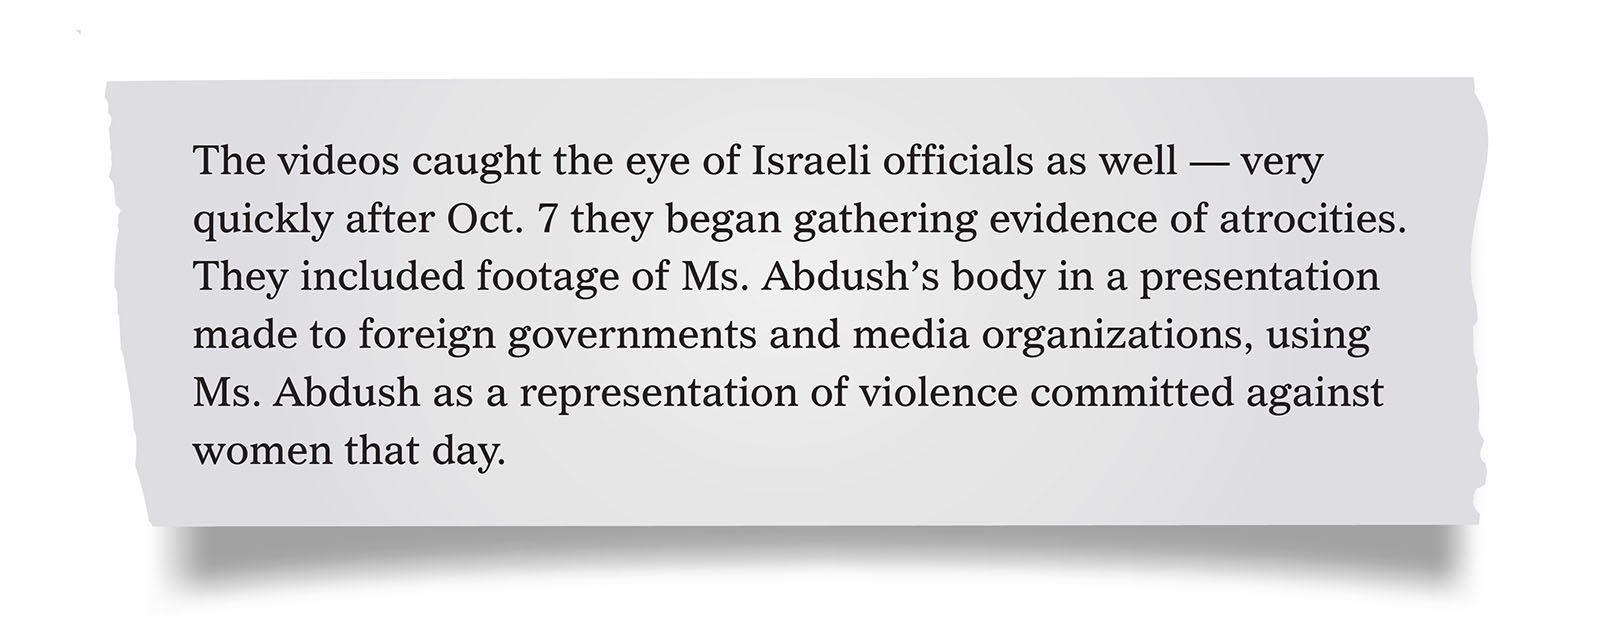 Pull quote:
The videos caught the eye of Israeli officials as well — very quickly after Oct. 7 they began gathering evidence of atrocities. They included footage of Ms. Abdush’s body in a presentation made to foreign governments and media organizations, using Ms. Abdush as a representation of violence committed against women that day.